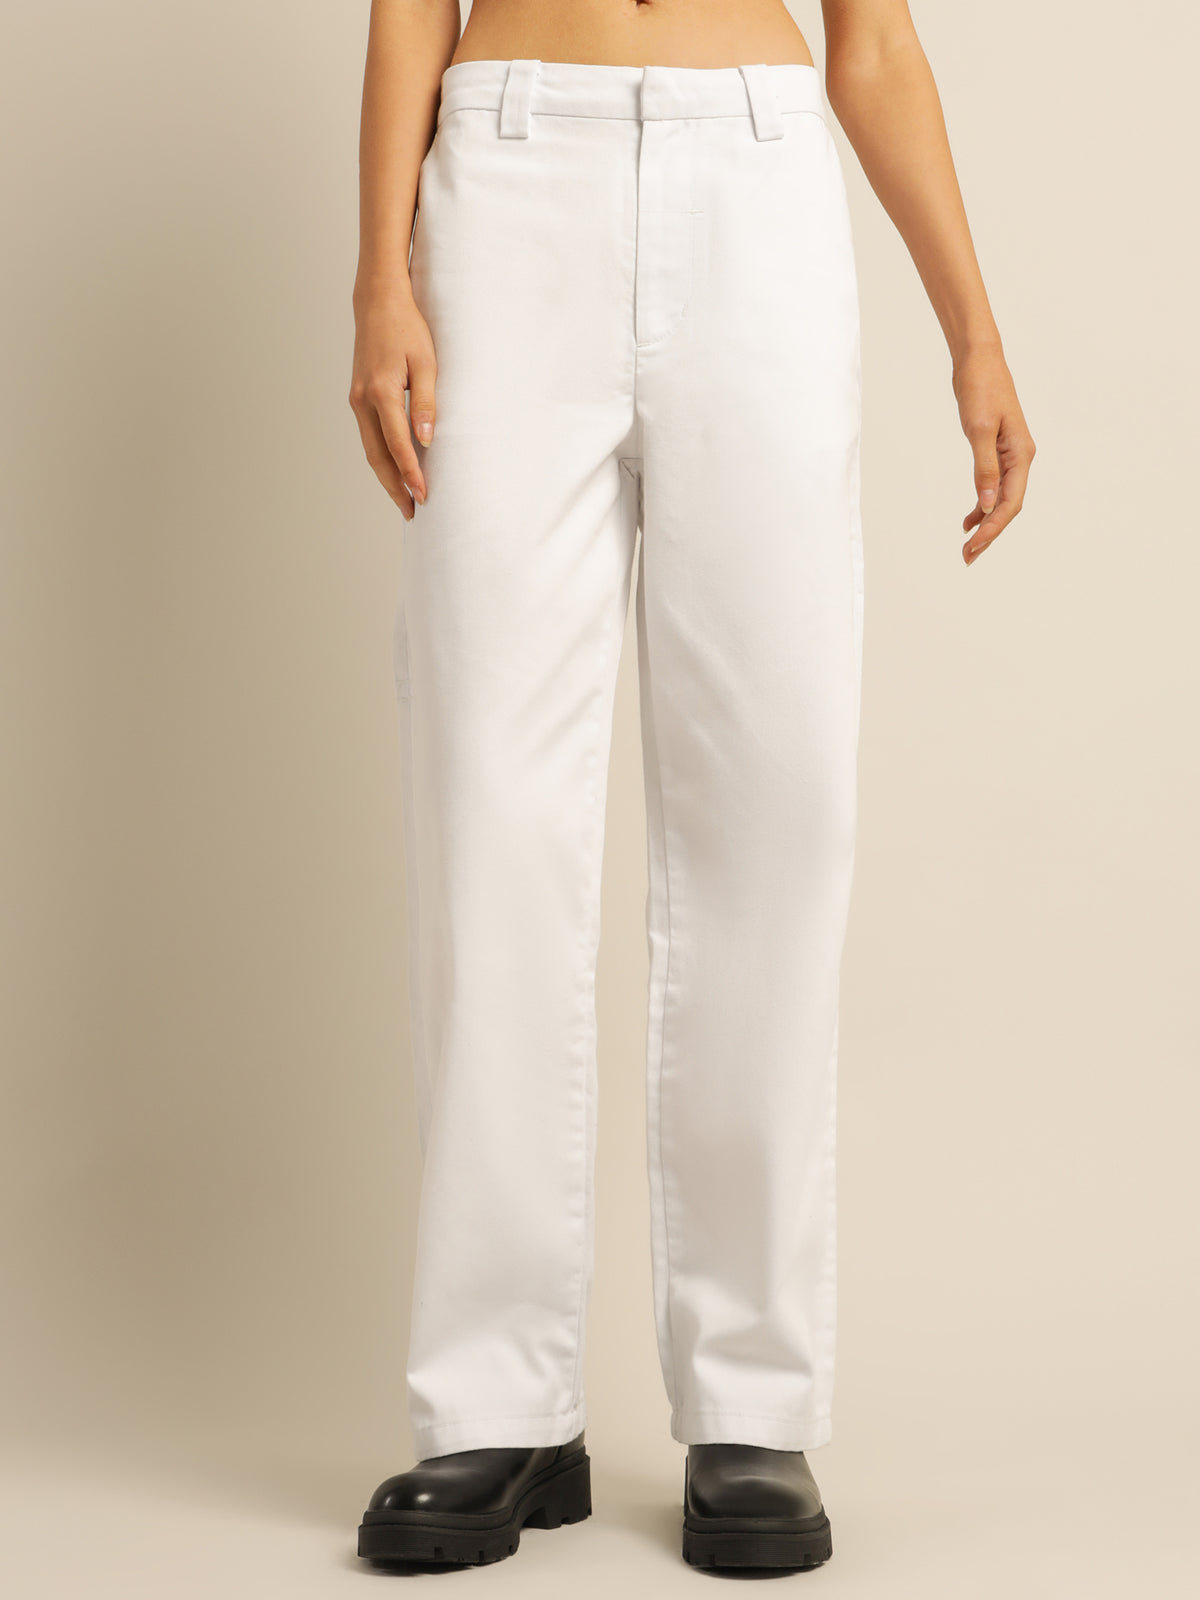 LAX Pant in Optic White